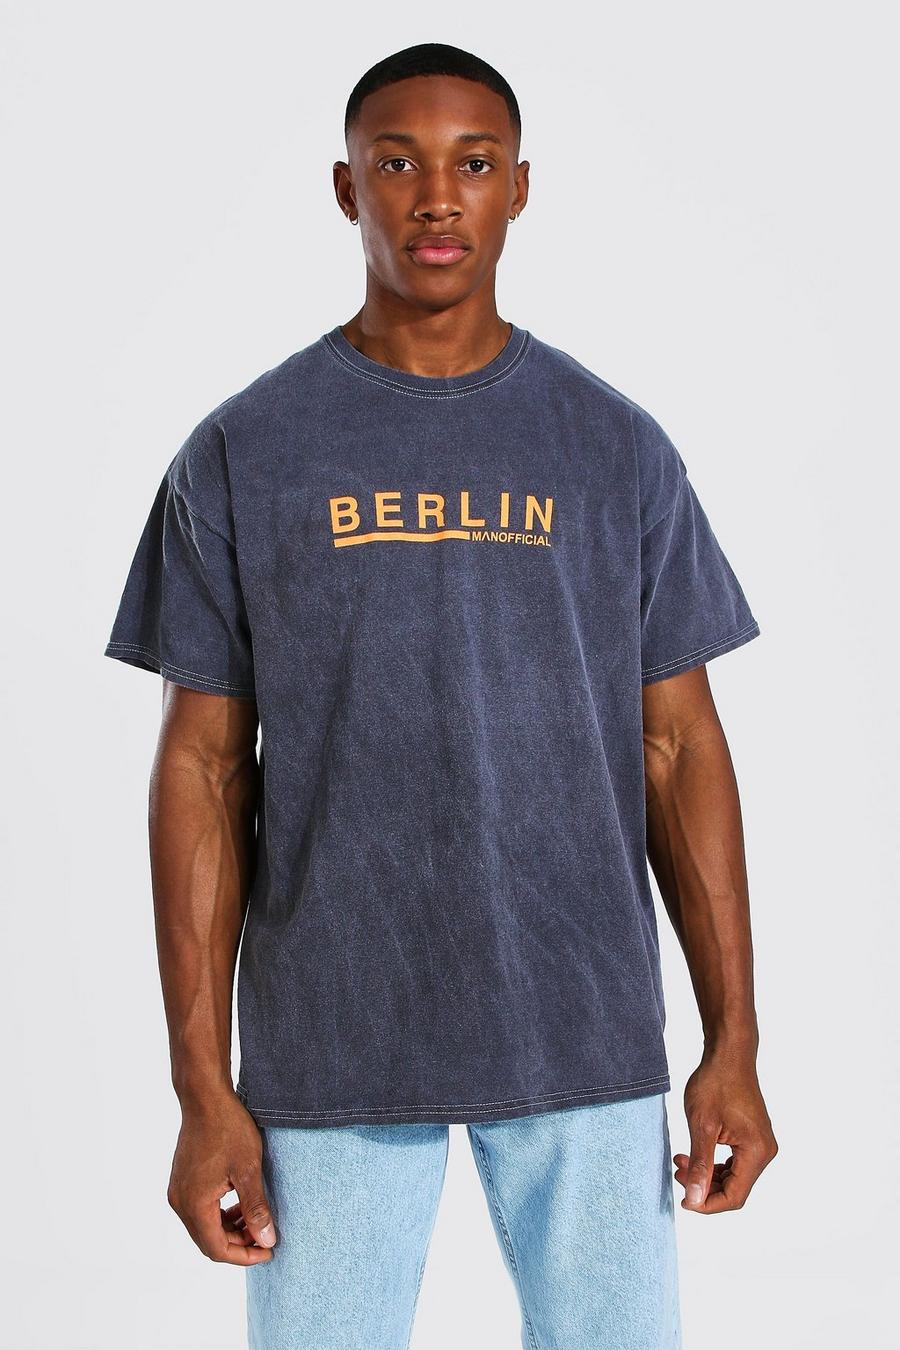 Charcoal Oversized Overdyed Berlin Graphic T-Shirt image number 1